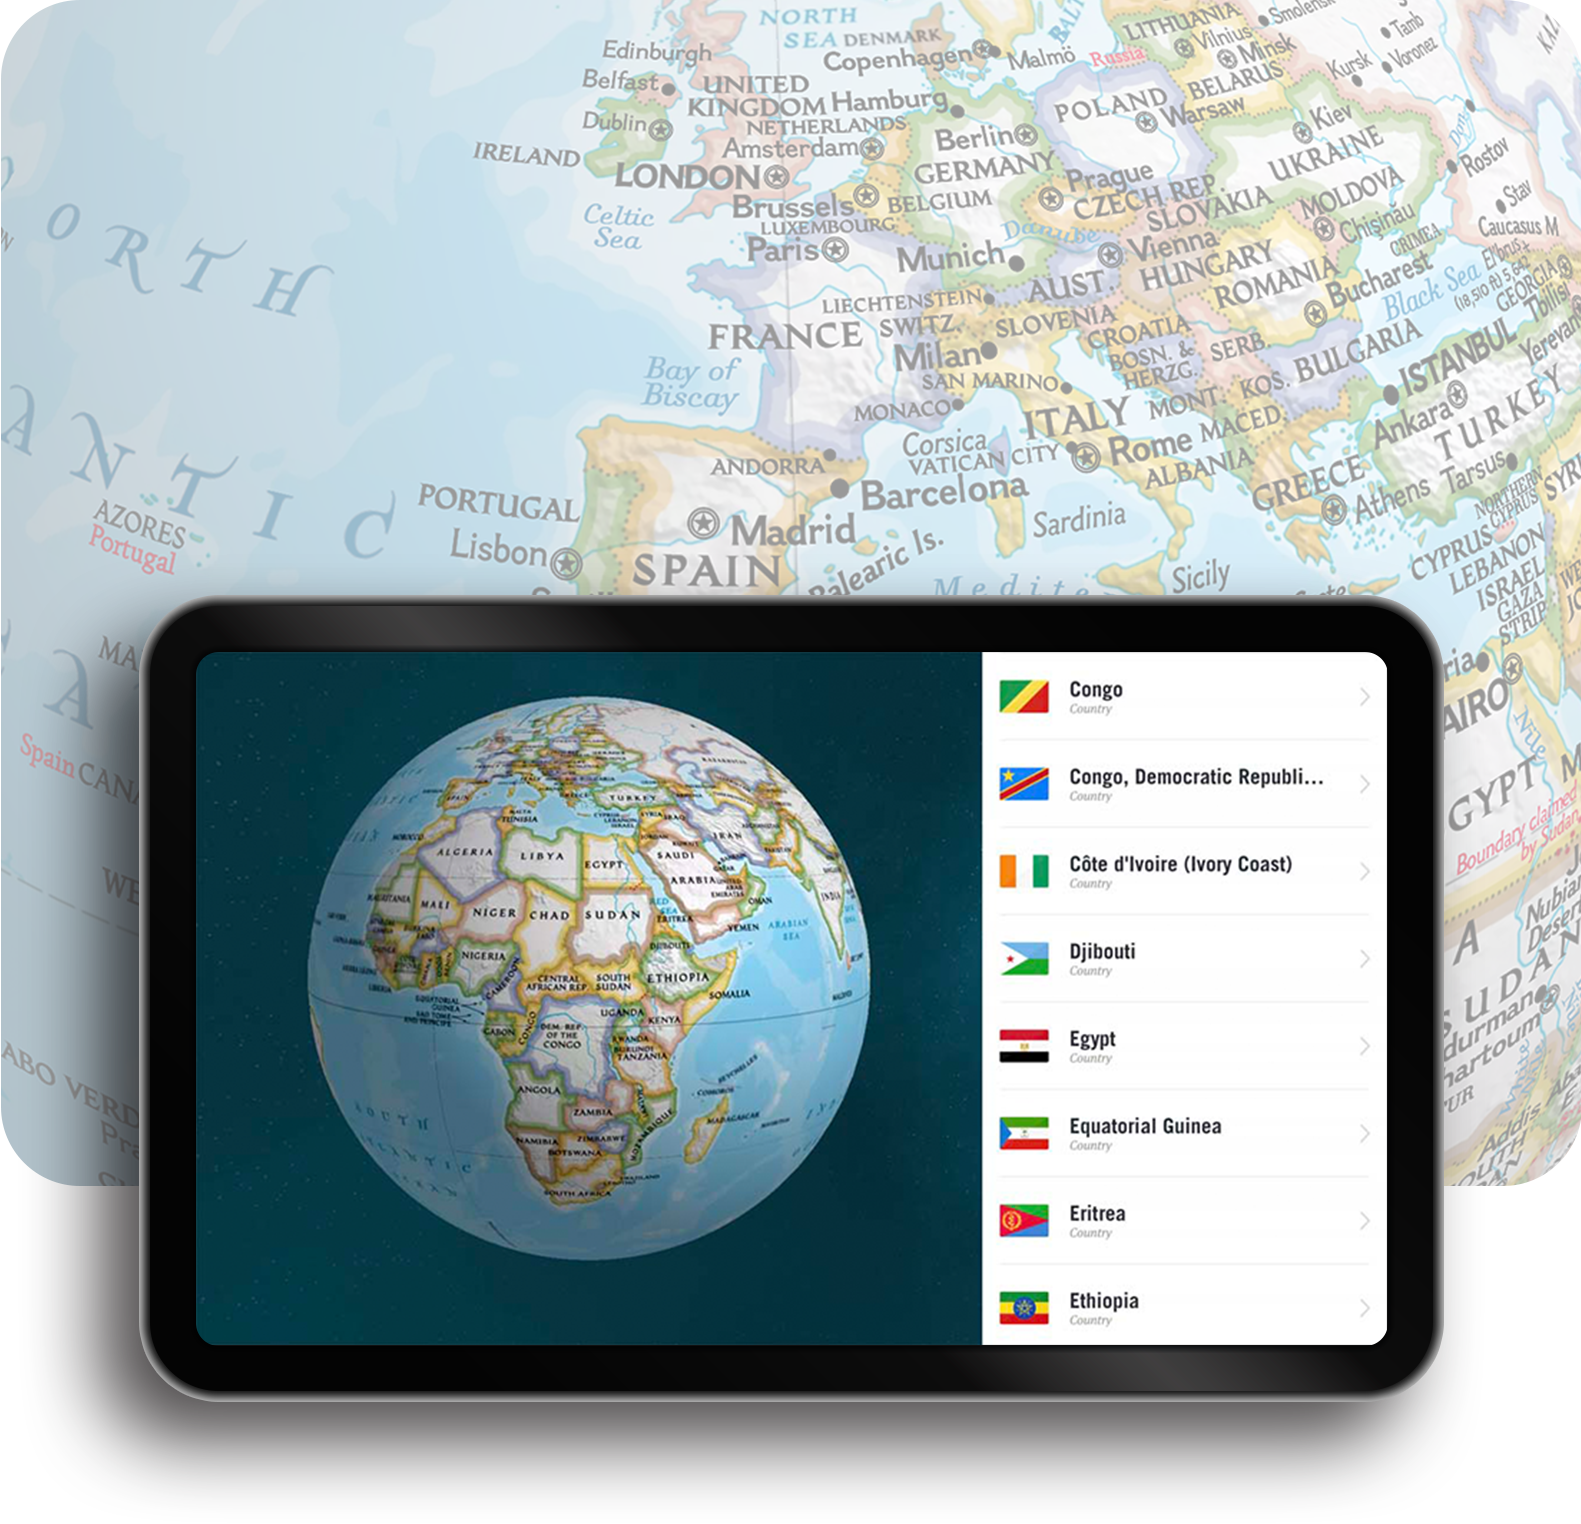 Composite image of app created for National Geographic World Atlas. Bottom image is a portion of a globe showing Europe. Top image is a globe showing Africa on the left and a list of countries and their flags on the right. Top image sits within the frame of a tablet in landscape view.